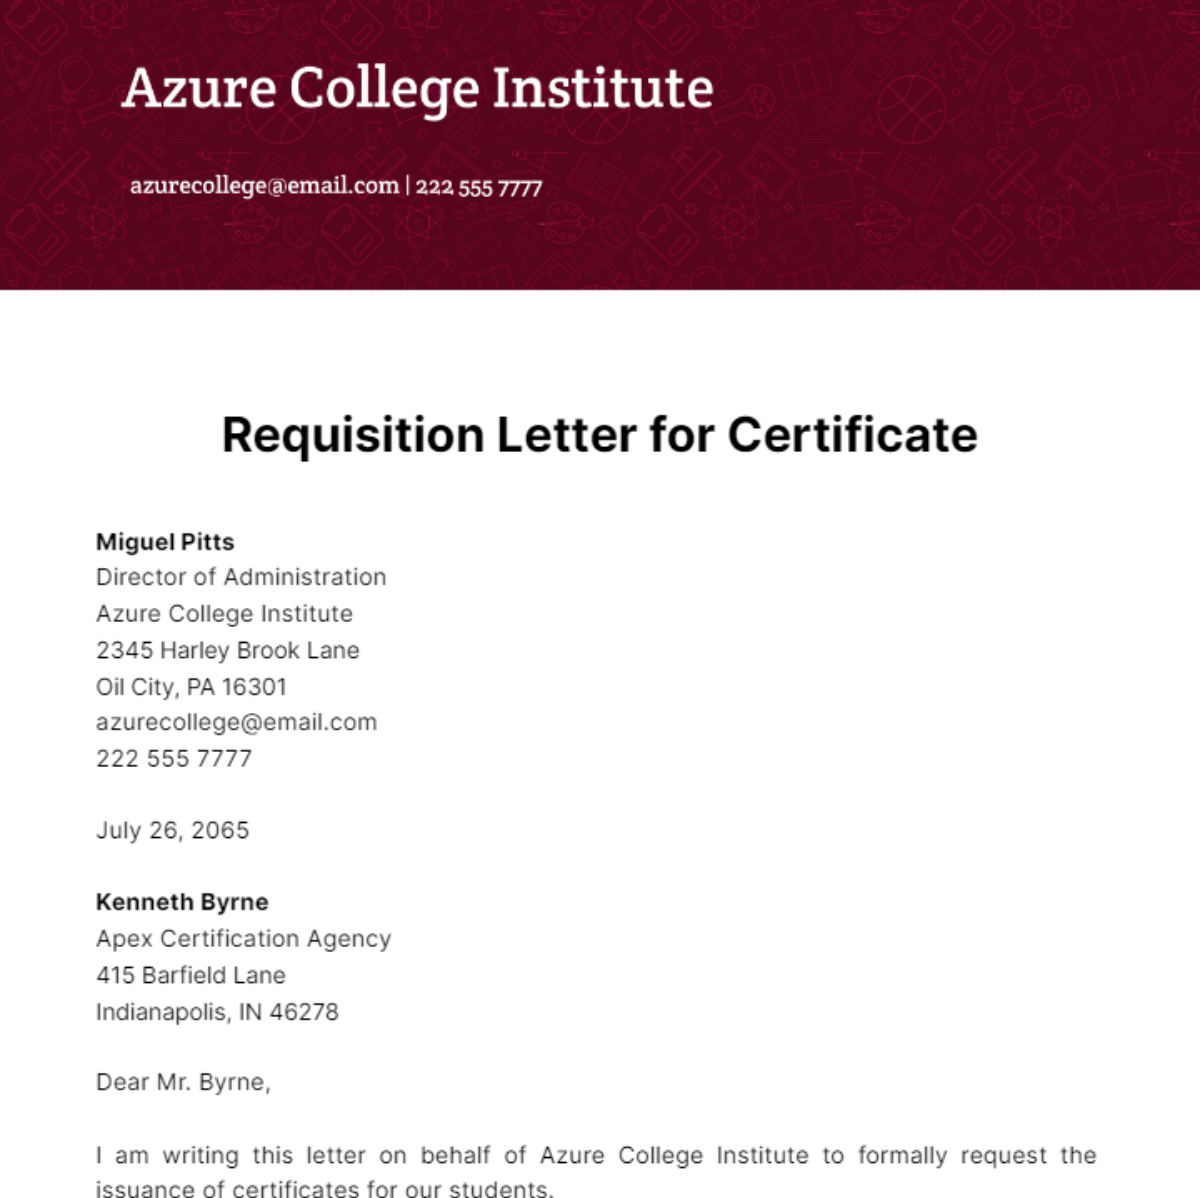 Requisition Letter for Certificate Template